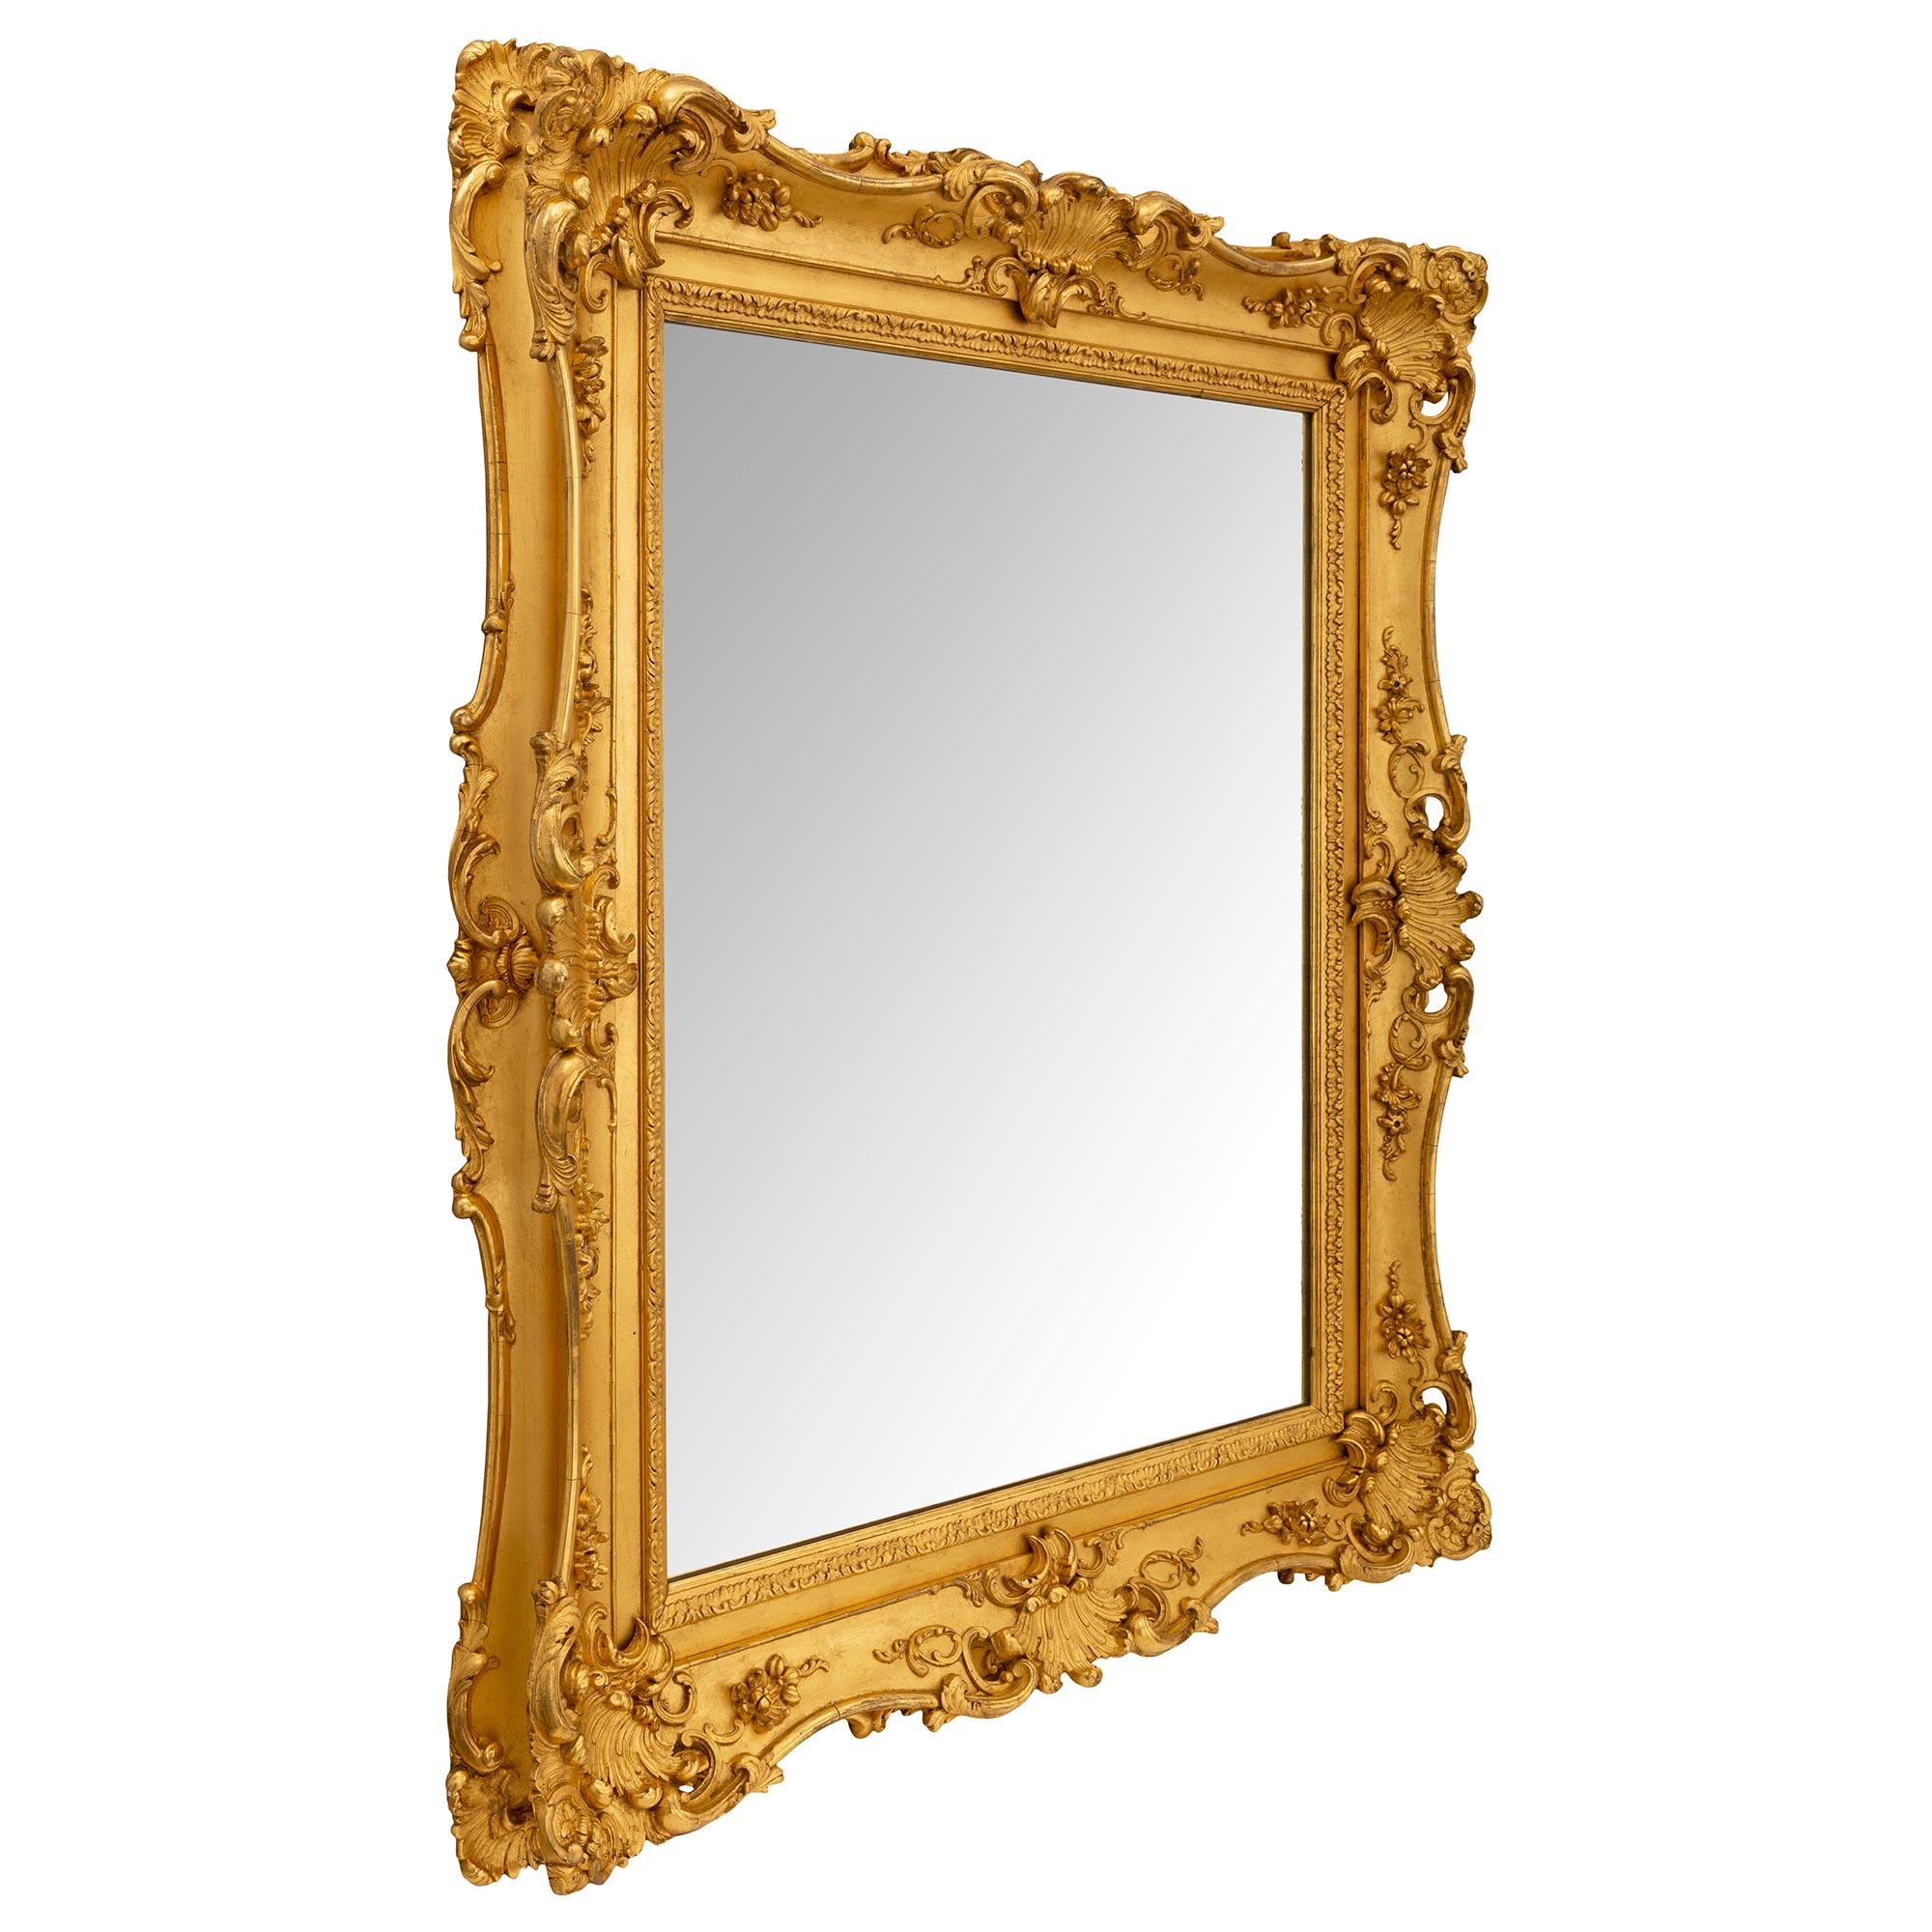 A striking French 19th century Louis XV st. giltwood mirror. The mirror retains its original mirror plate framed within a fine straight mottled border with a fine wrap around foliate band. The frame displays an elegant and most decorative scalloped